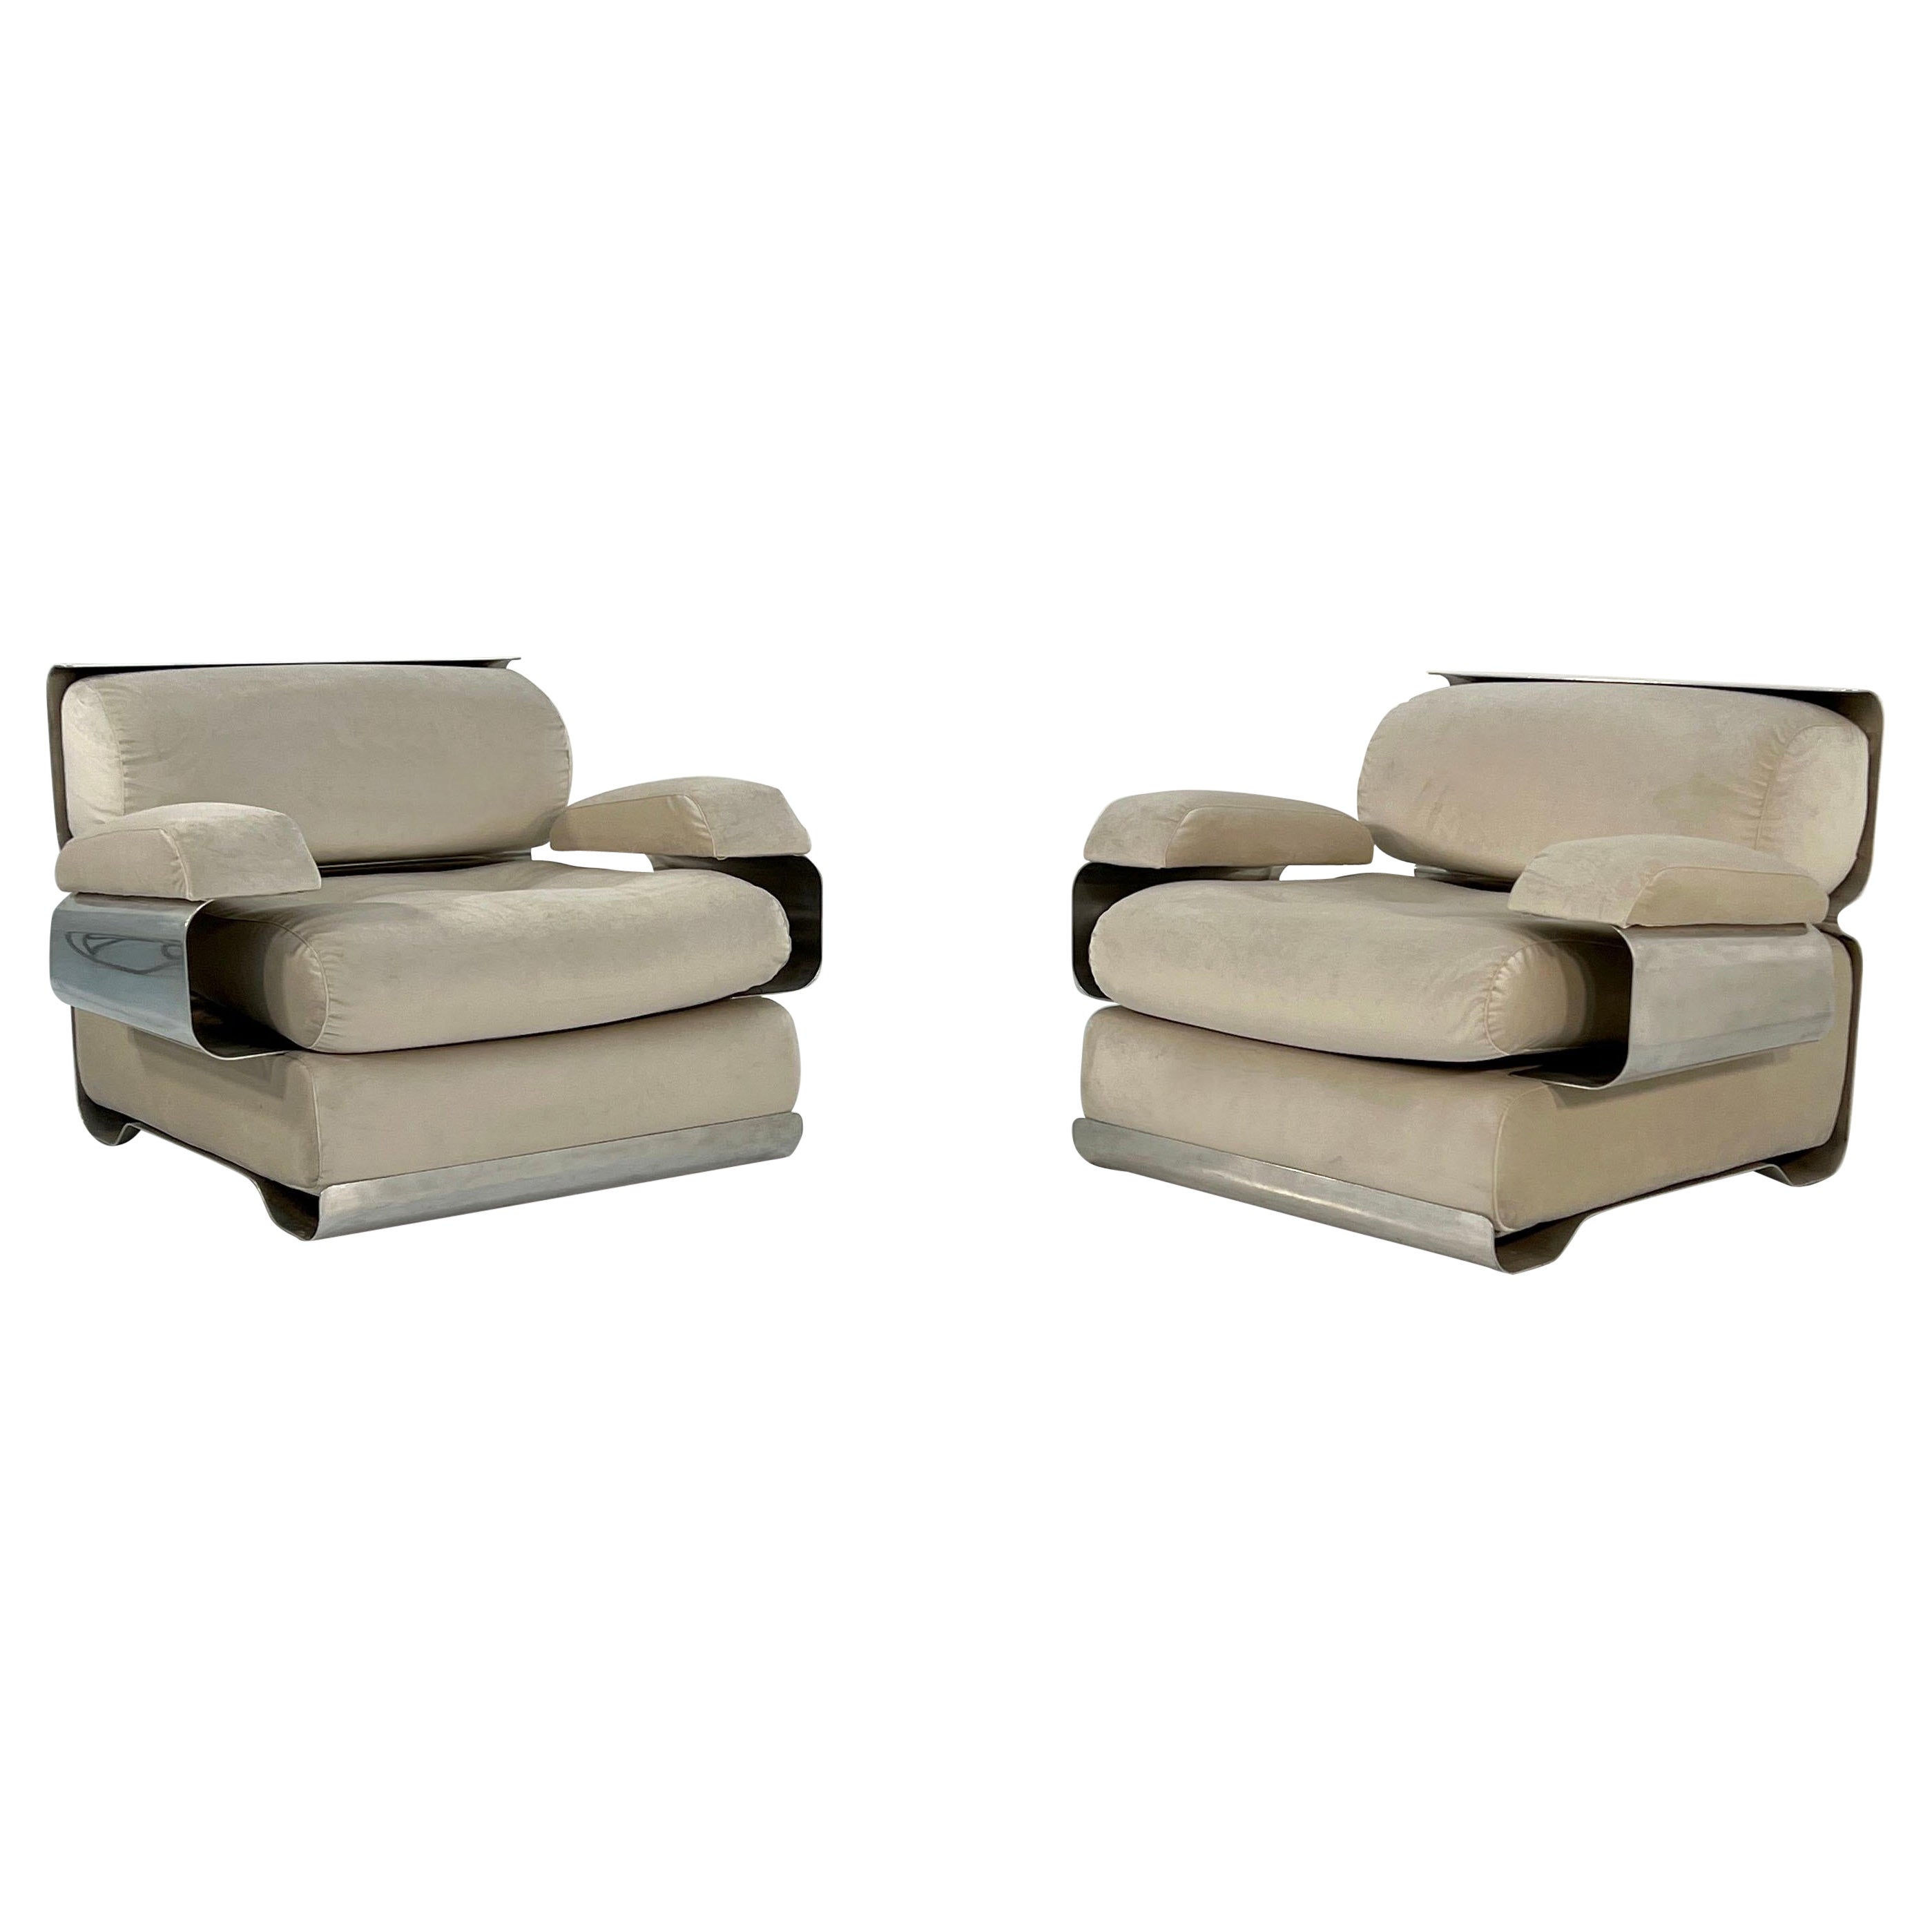 Pair of Armchairs by Gian Pietro Arosio for D.A.S, 1970s